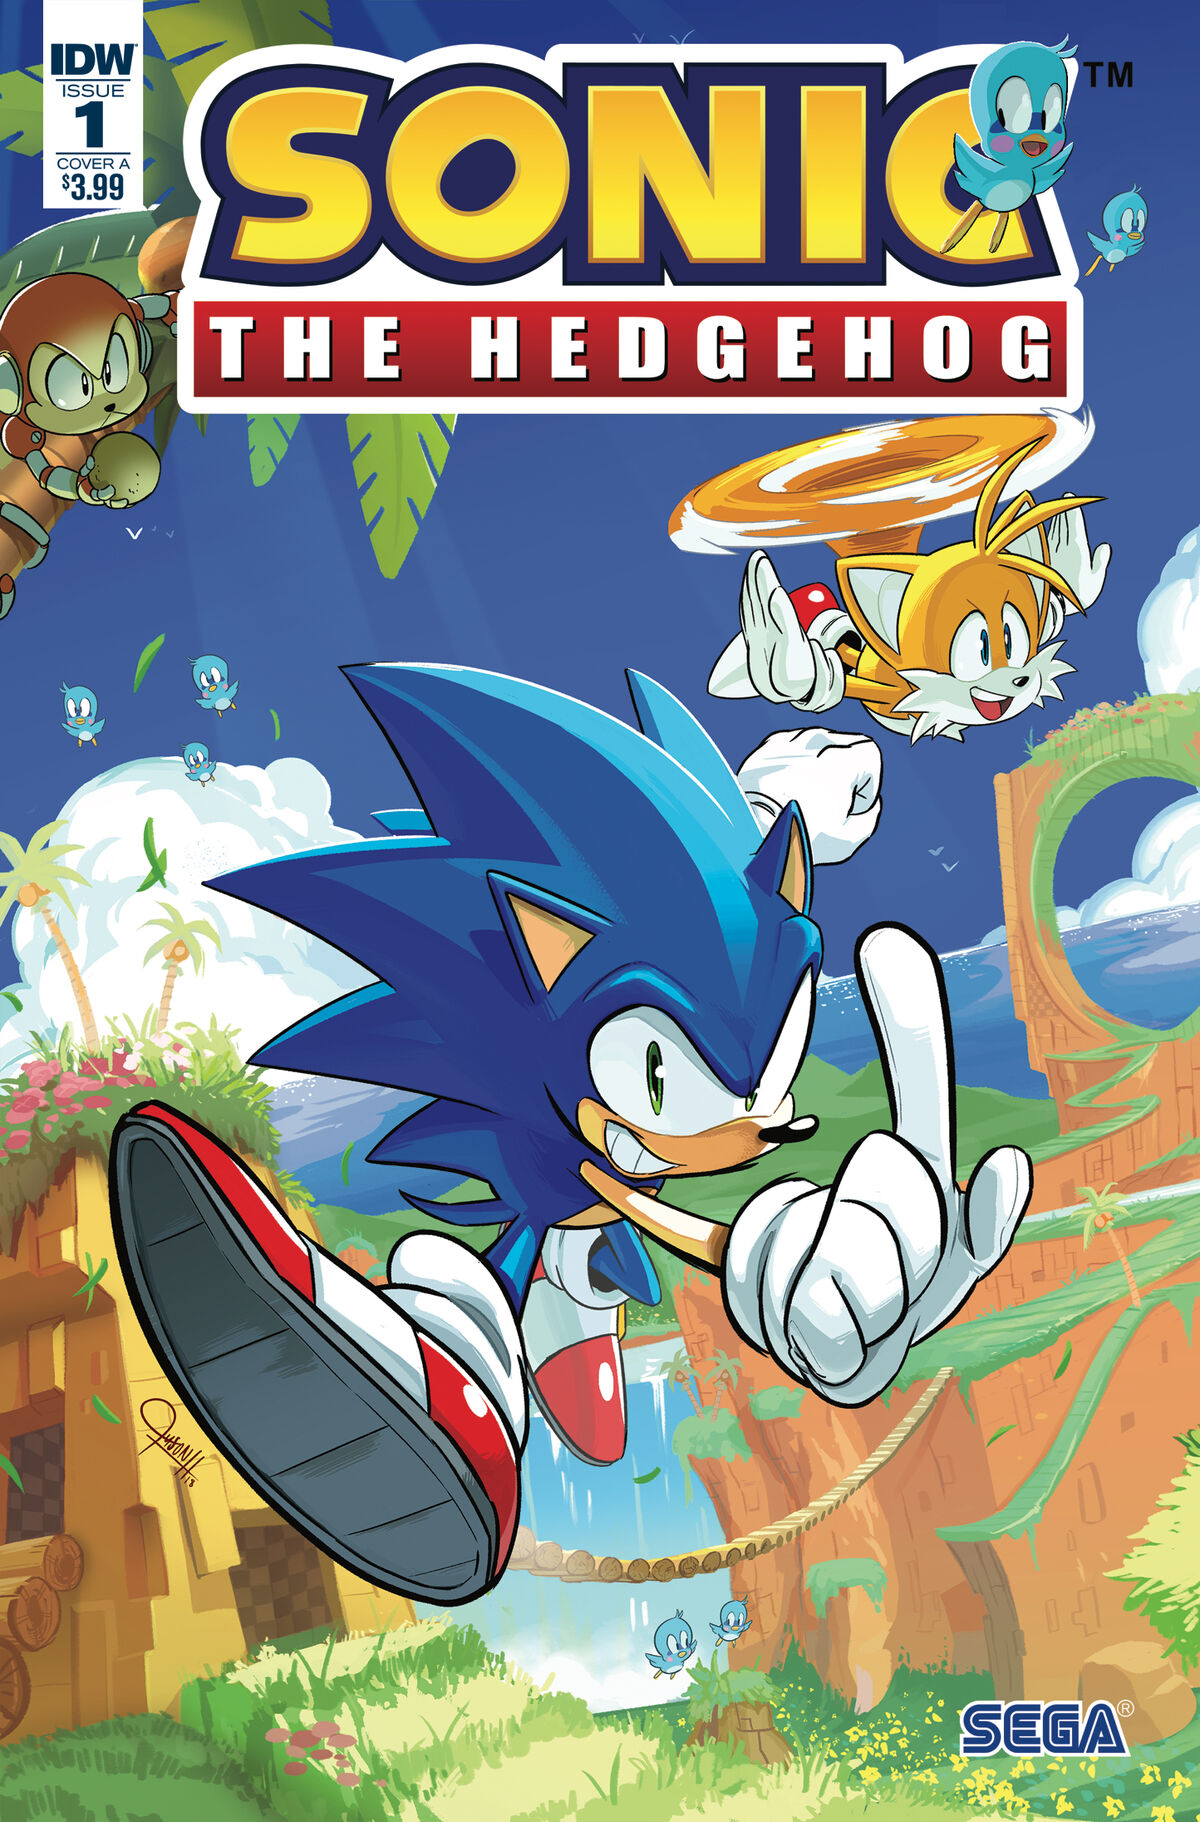 Tyson Hesse Sonic, Page 15